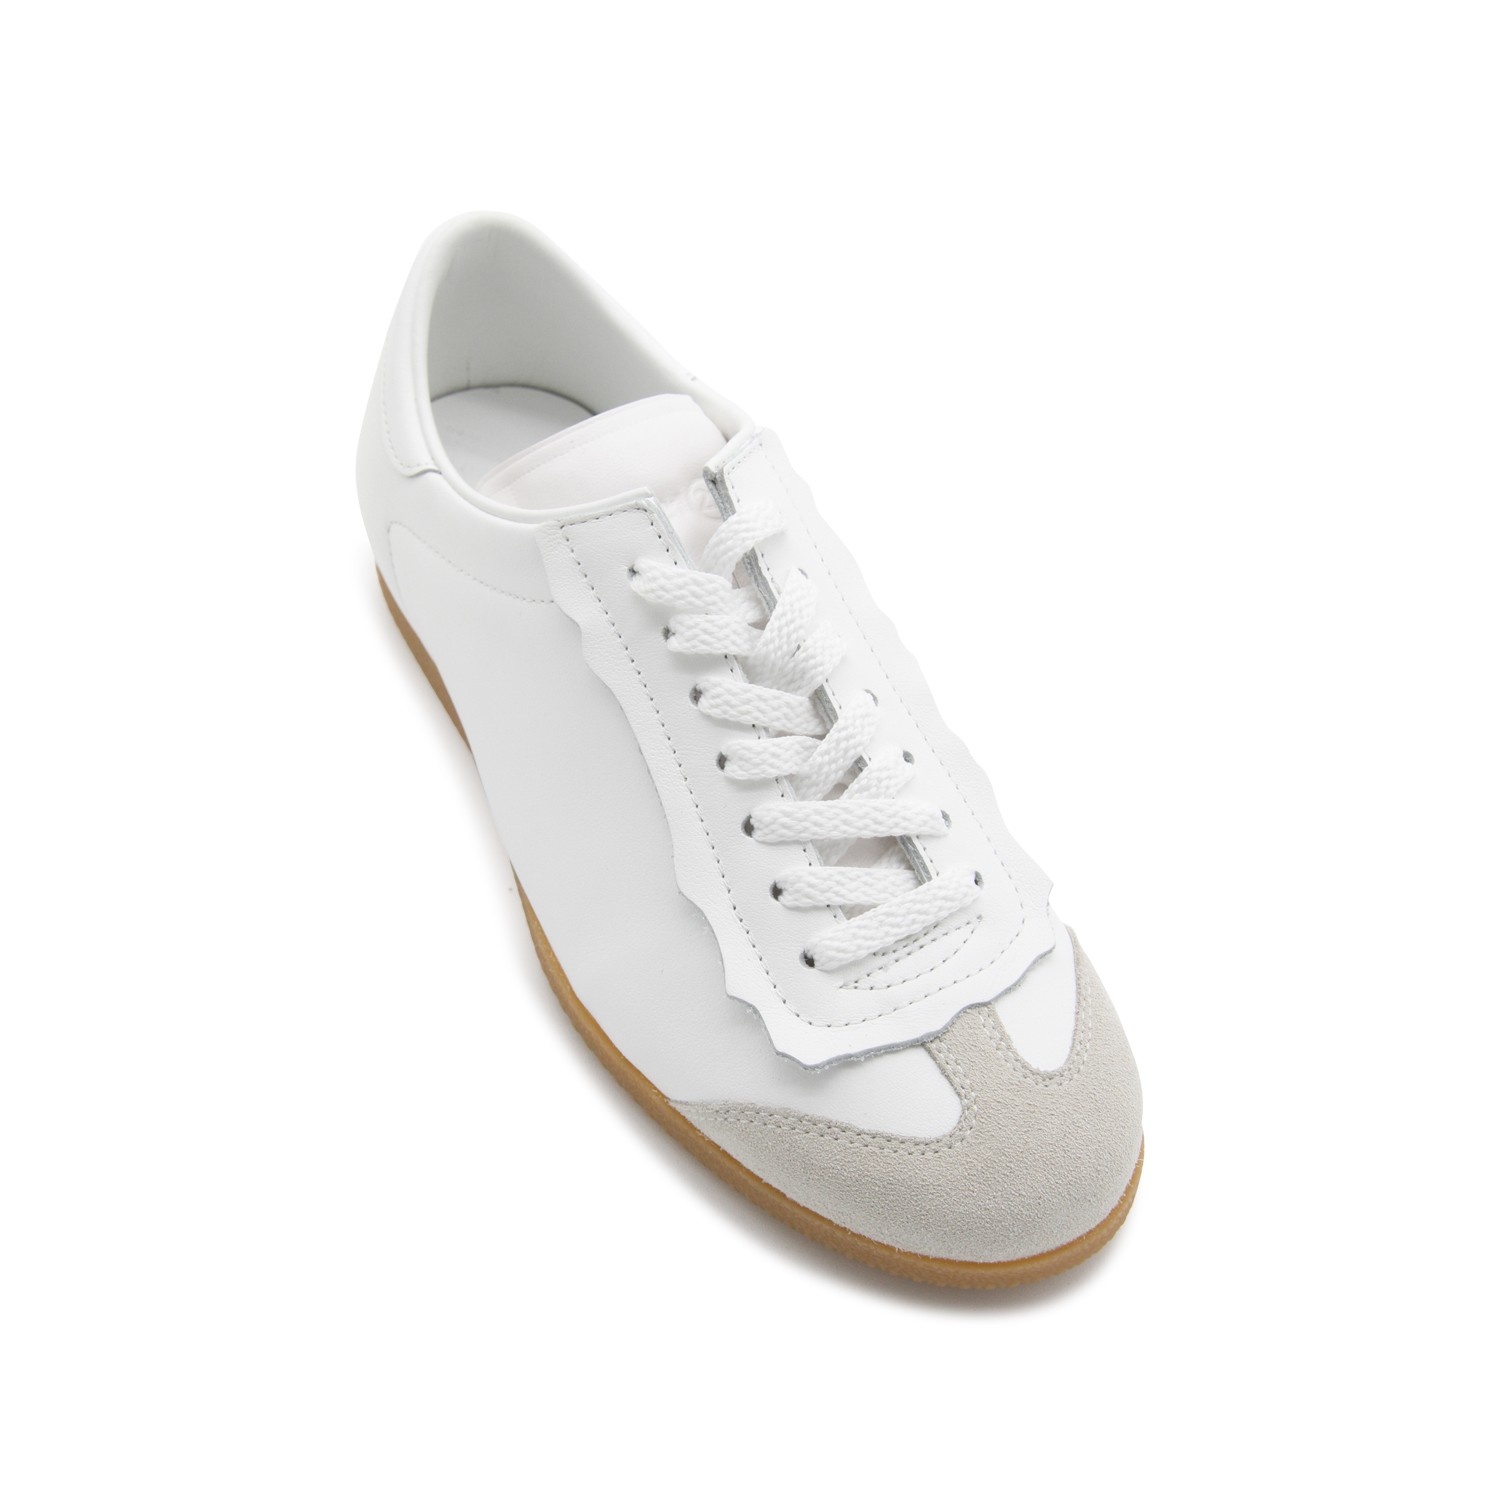 WHITE LEATHER AND GREY SUEDE SNEAKERS - 4